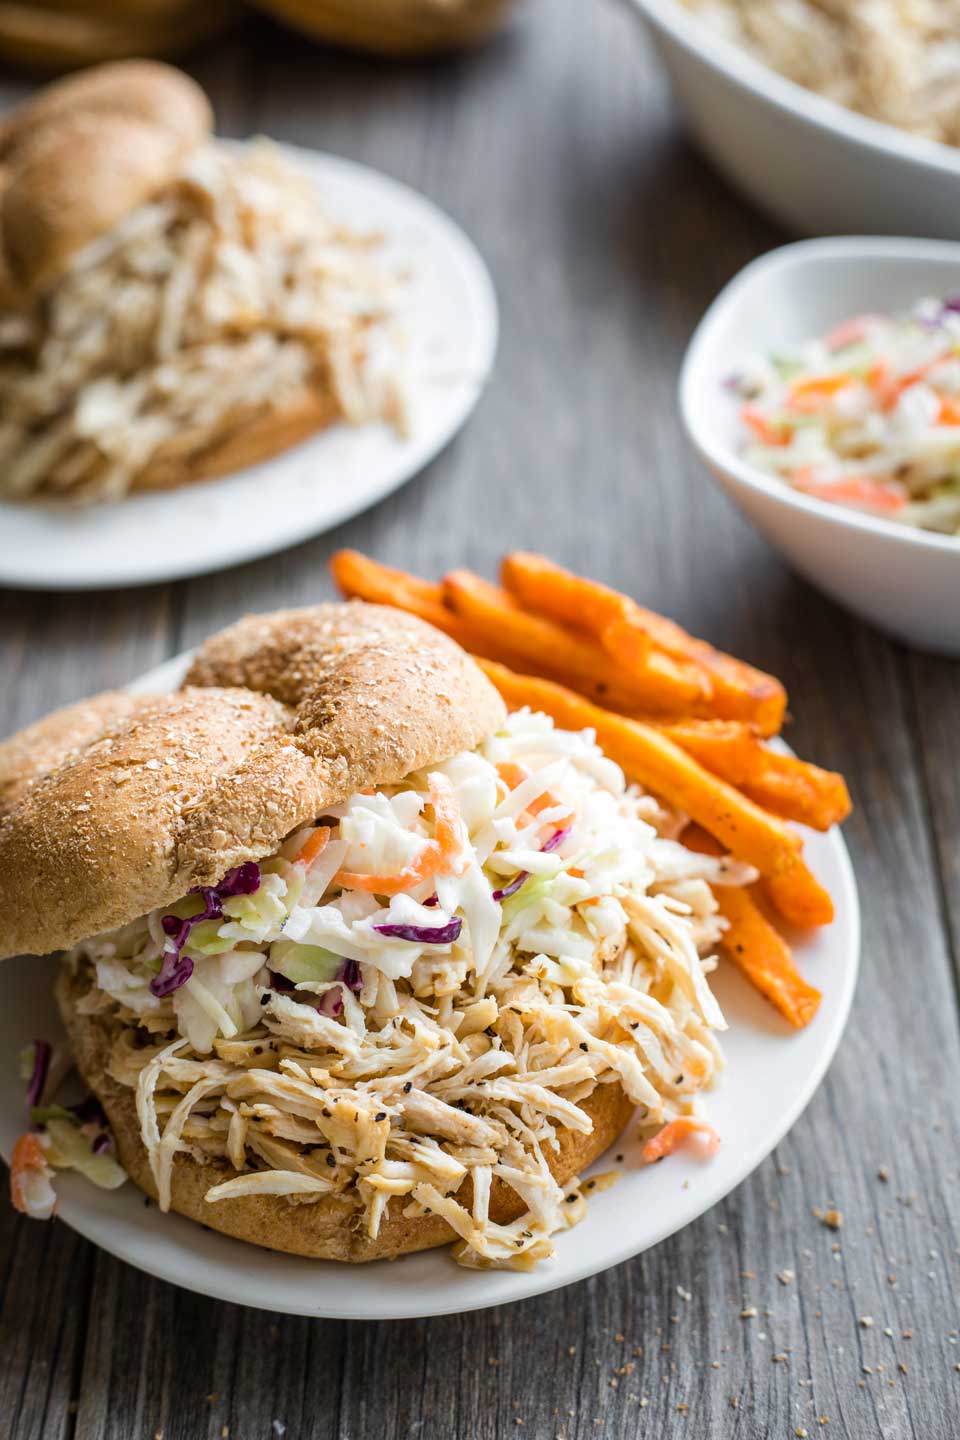 BBQ shredded chicken sandwich topped with coleslaw on a plate next to sweet potato fries